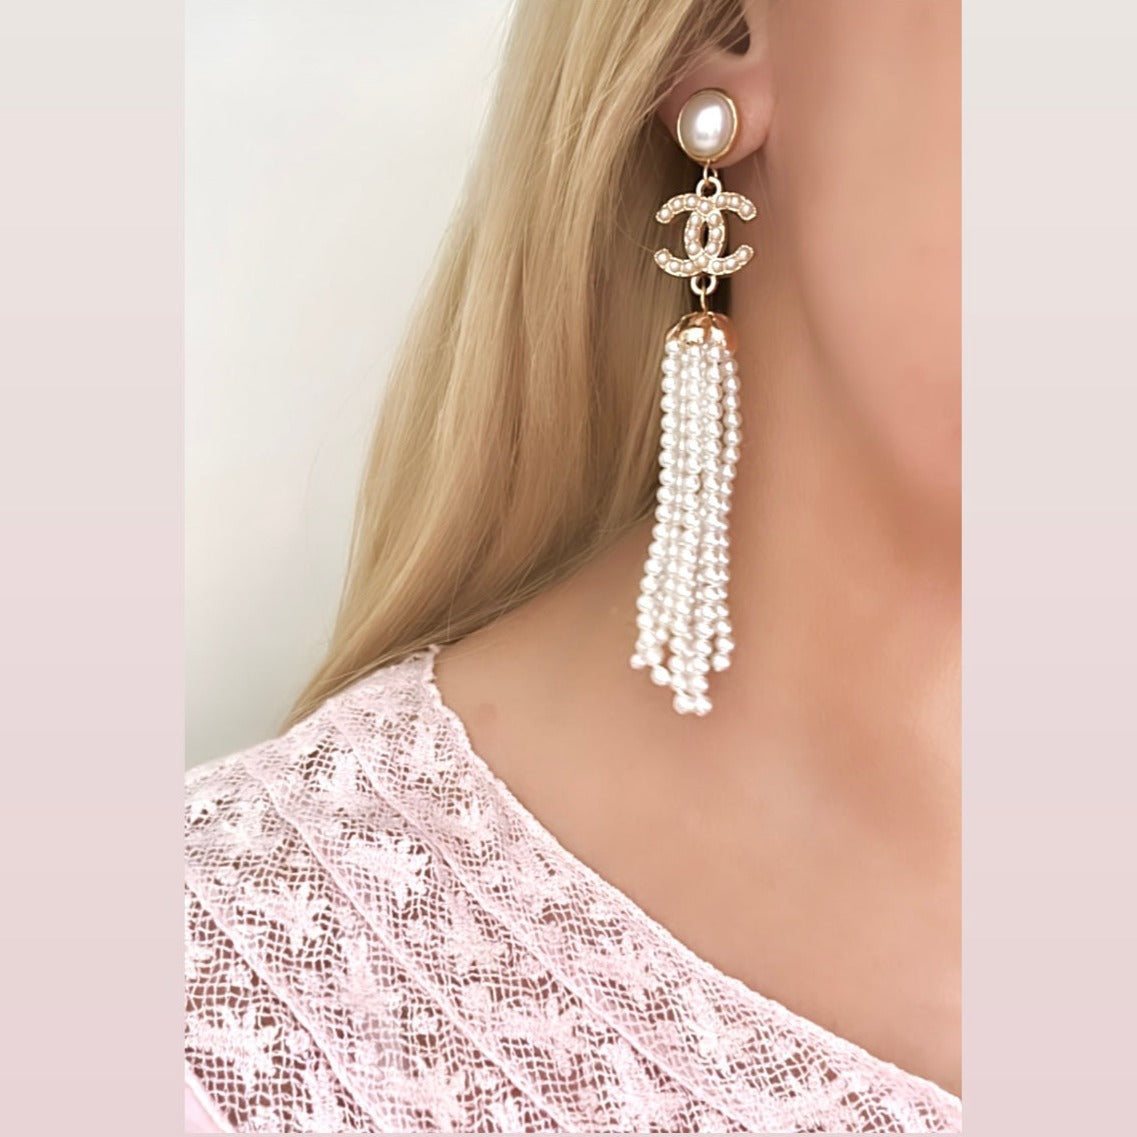 The Couture Earrings